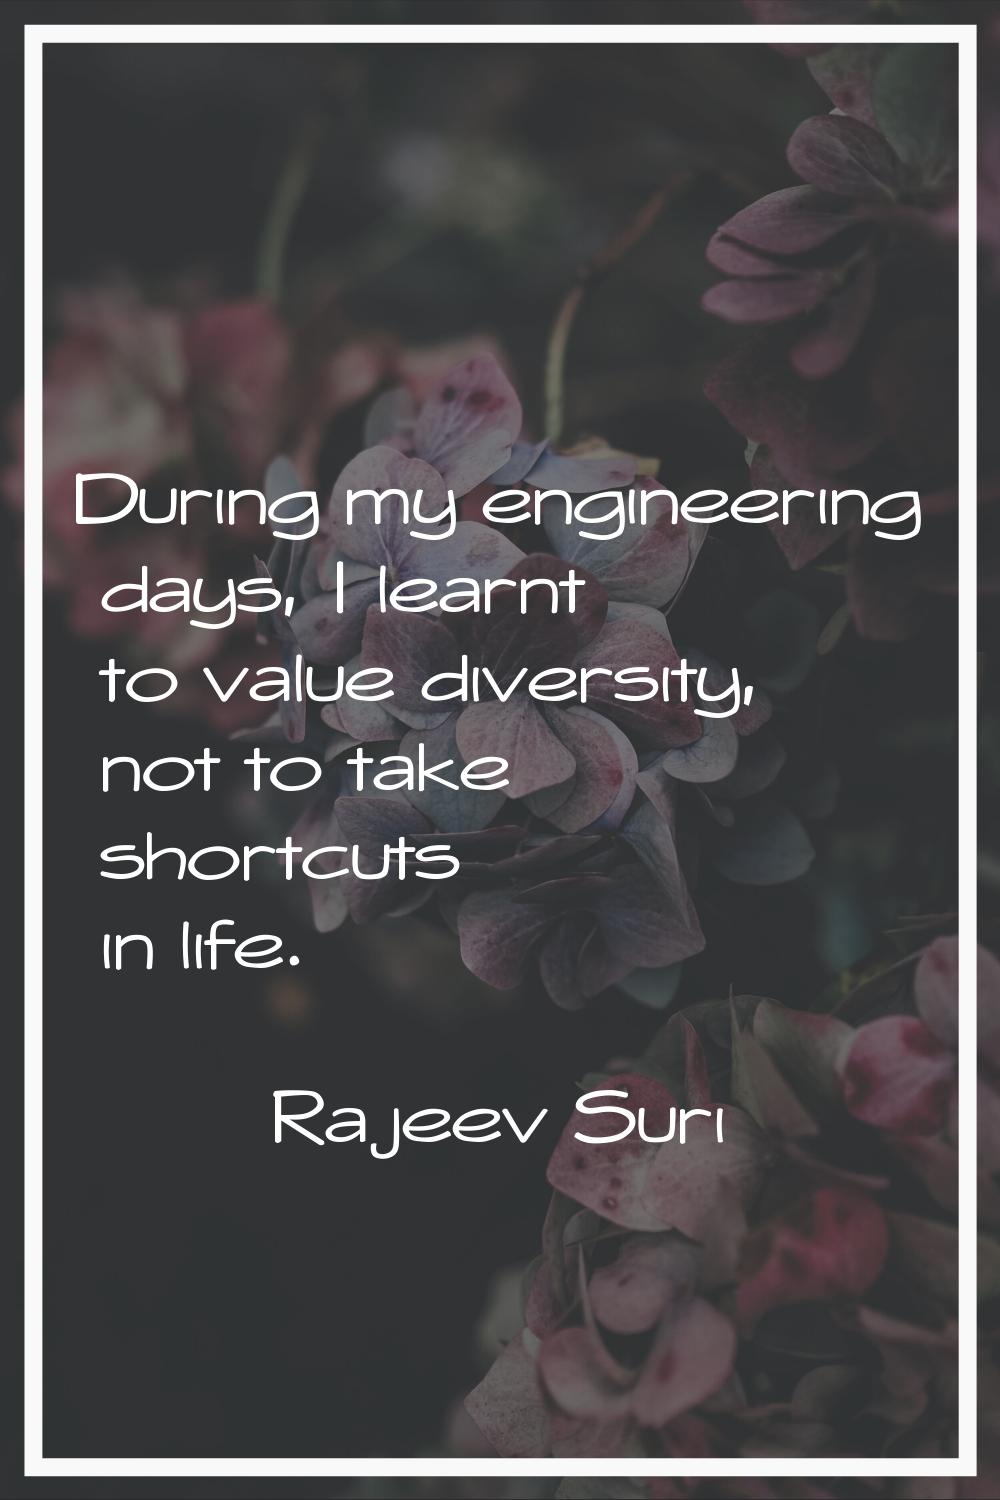 During my engineering days, I learnt to value diversity, not to take shortcuts in life.